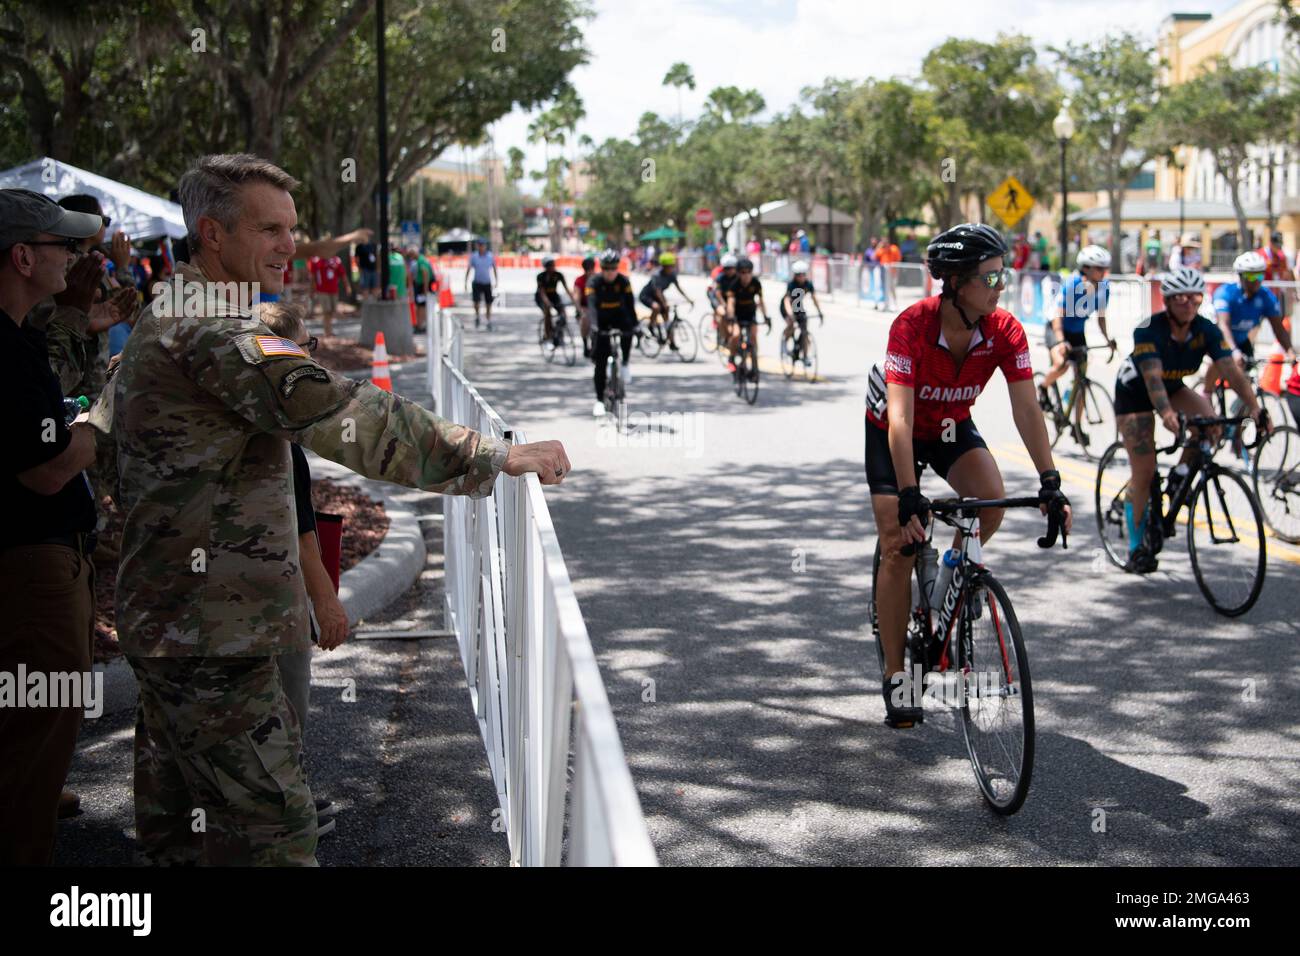 U.S. Army General Richard Clarke, commander, United States Special Operations Command (SOCOM) observes cyclists during the DoD Warrior Games on Aug. 23, 2022 at the ESPN Wide World of Sports Complex in Orlando, Florida. General Clarke is making his last visit as SOCOM commander to the DoD Warrior Games to show his support for Team SOCOM and all participants in the games before he relinquishes command on Aug. 30, 2022. (Photo by U.S. Marine Corps Gunnery Sgt. Eric L. Alabiso II) Stock Photo